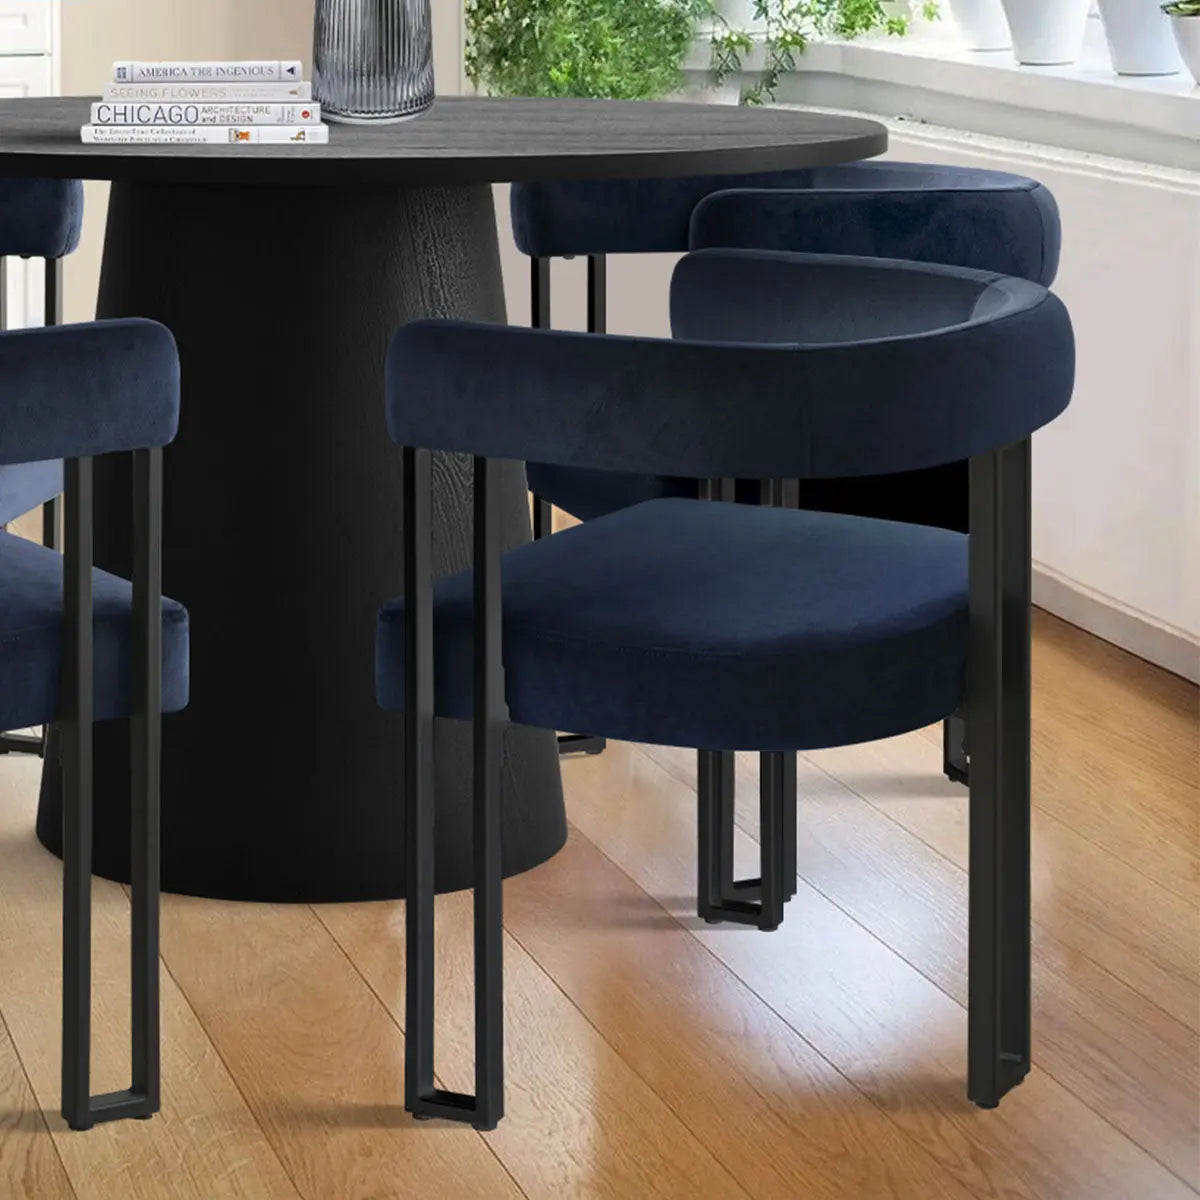 Ultra-modern 46” Dwen Solid Black Table & Plush Mia Velvet Dining Chair - Stylish, Robust 4-Seat Pedestal Round Dining Set for Contemporary Homes The Pop Maison